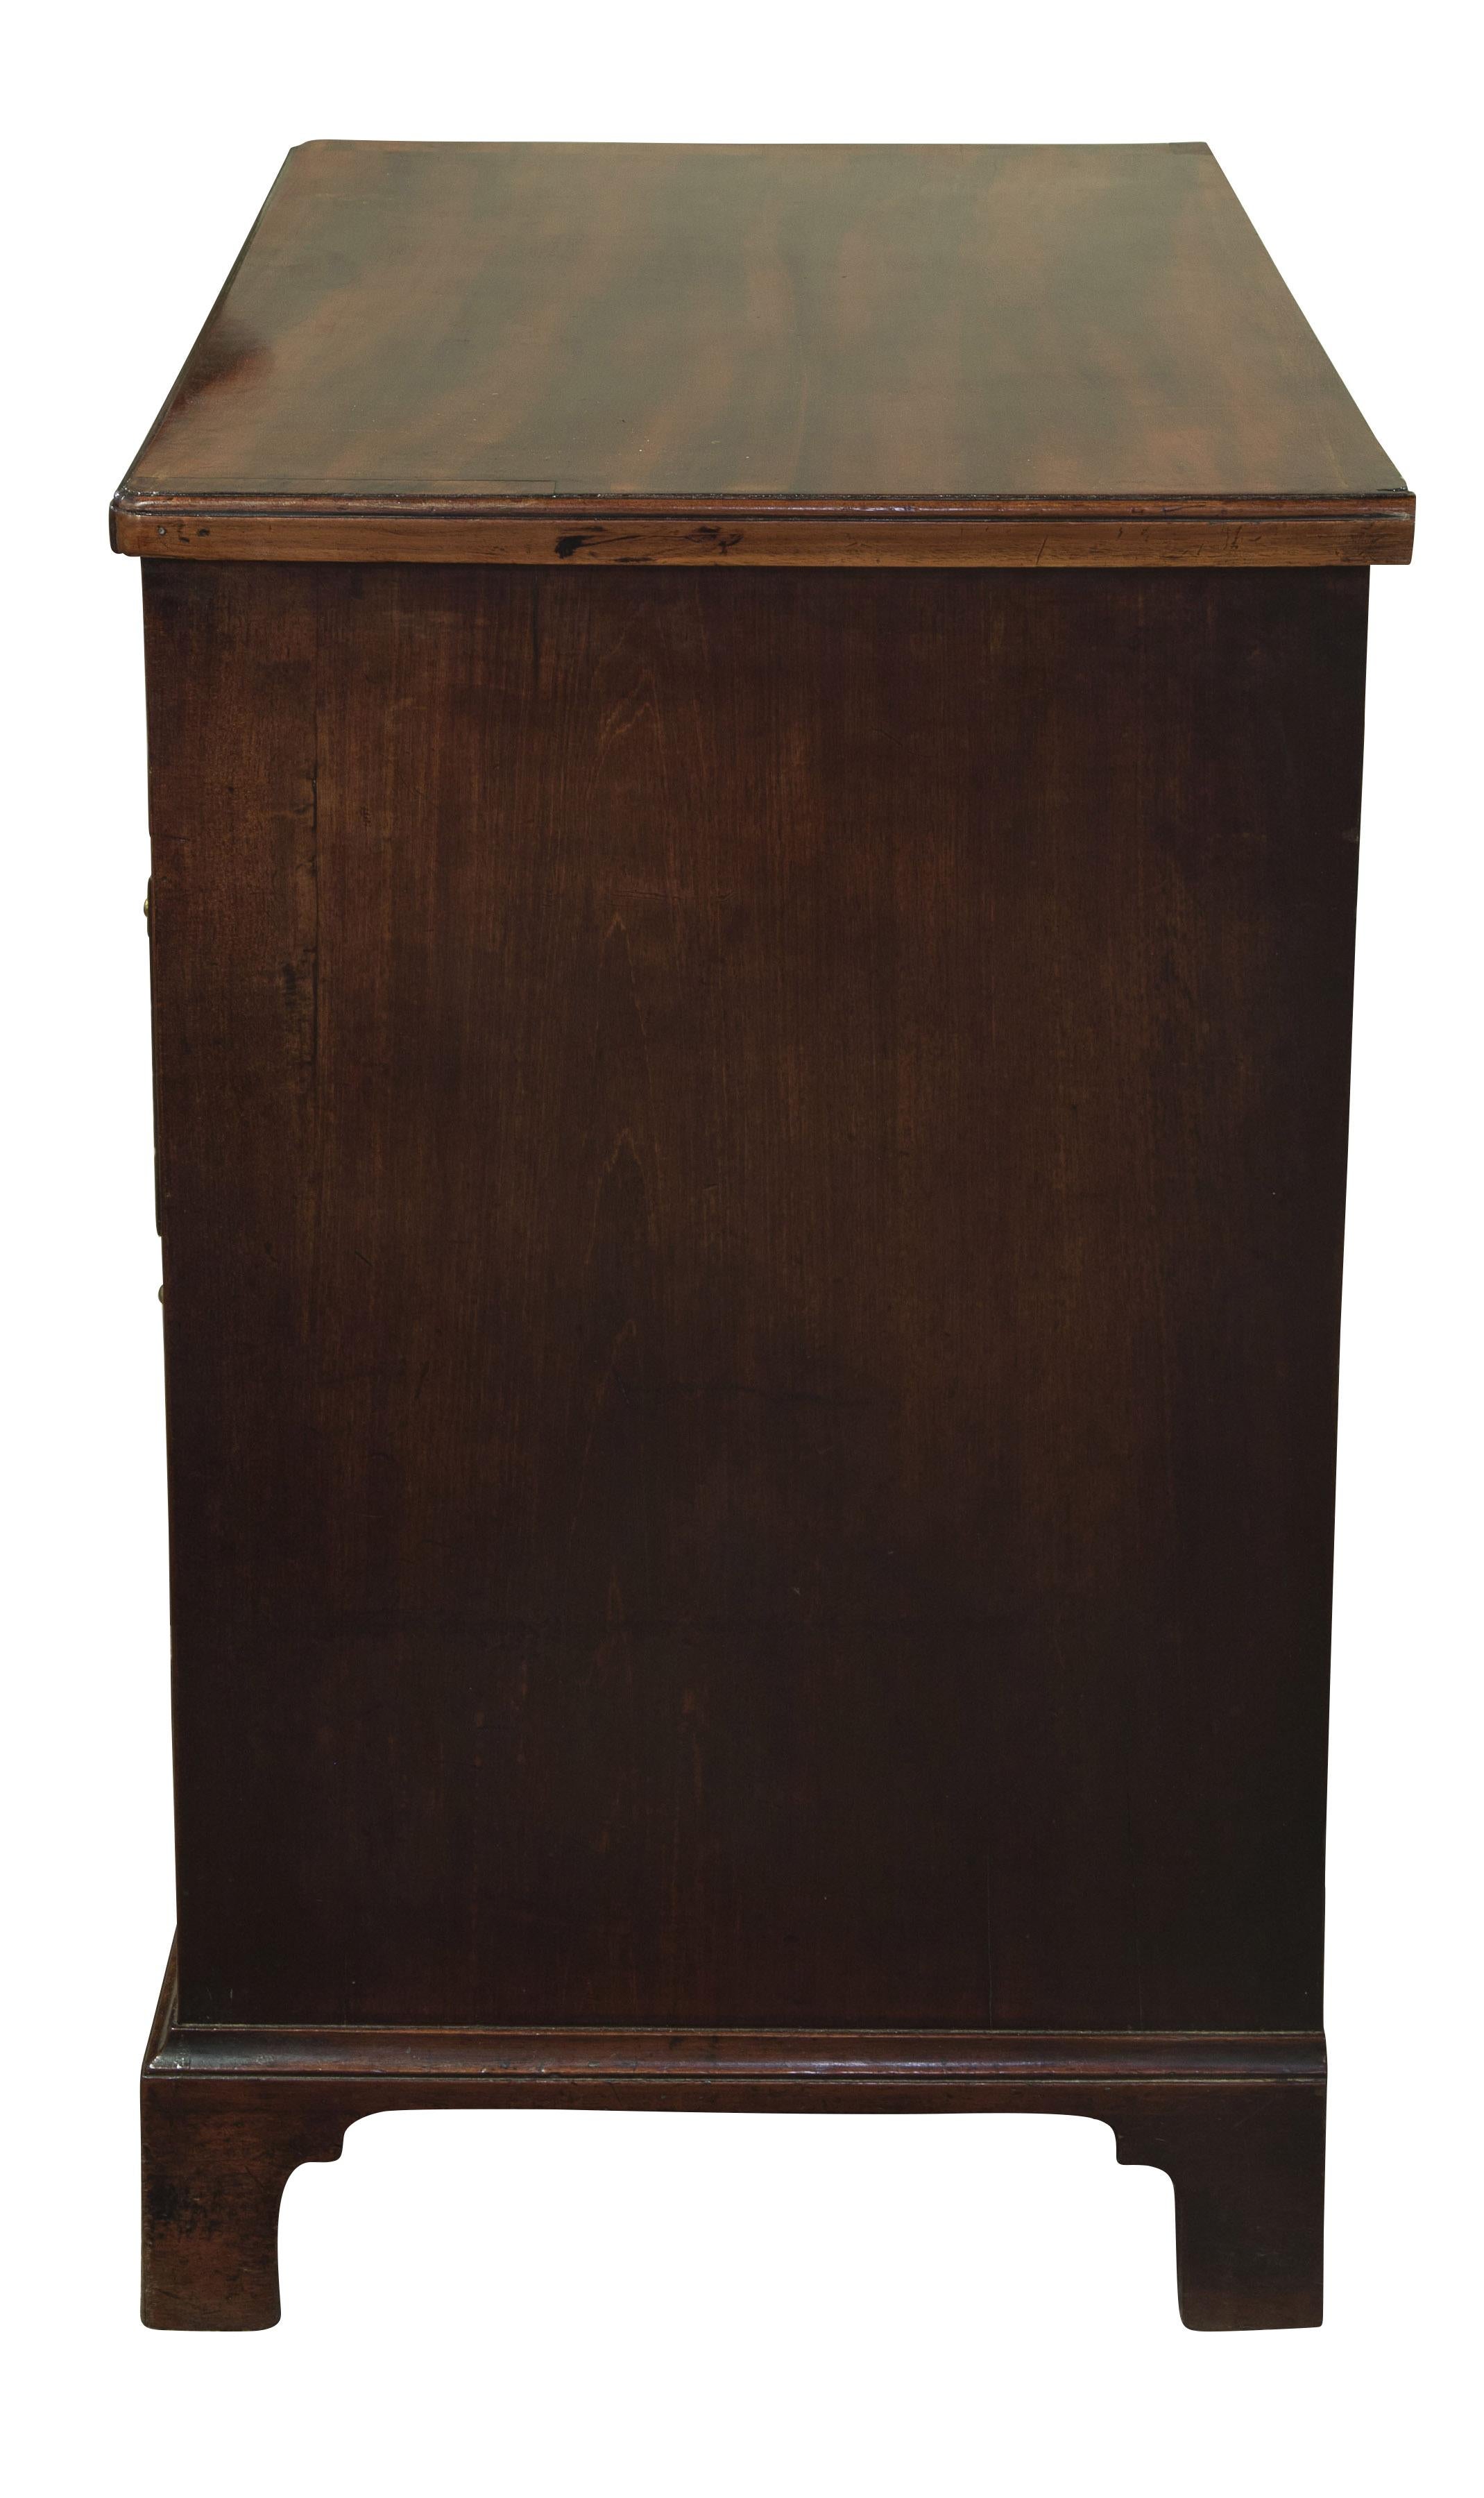 George III mahogany kneehold desk, with seven drawers and removable cupboard on bracket feet.